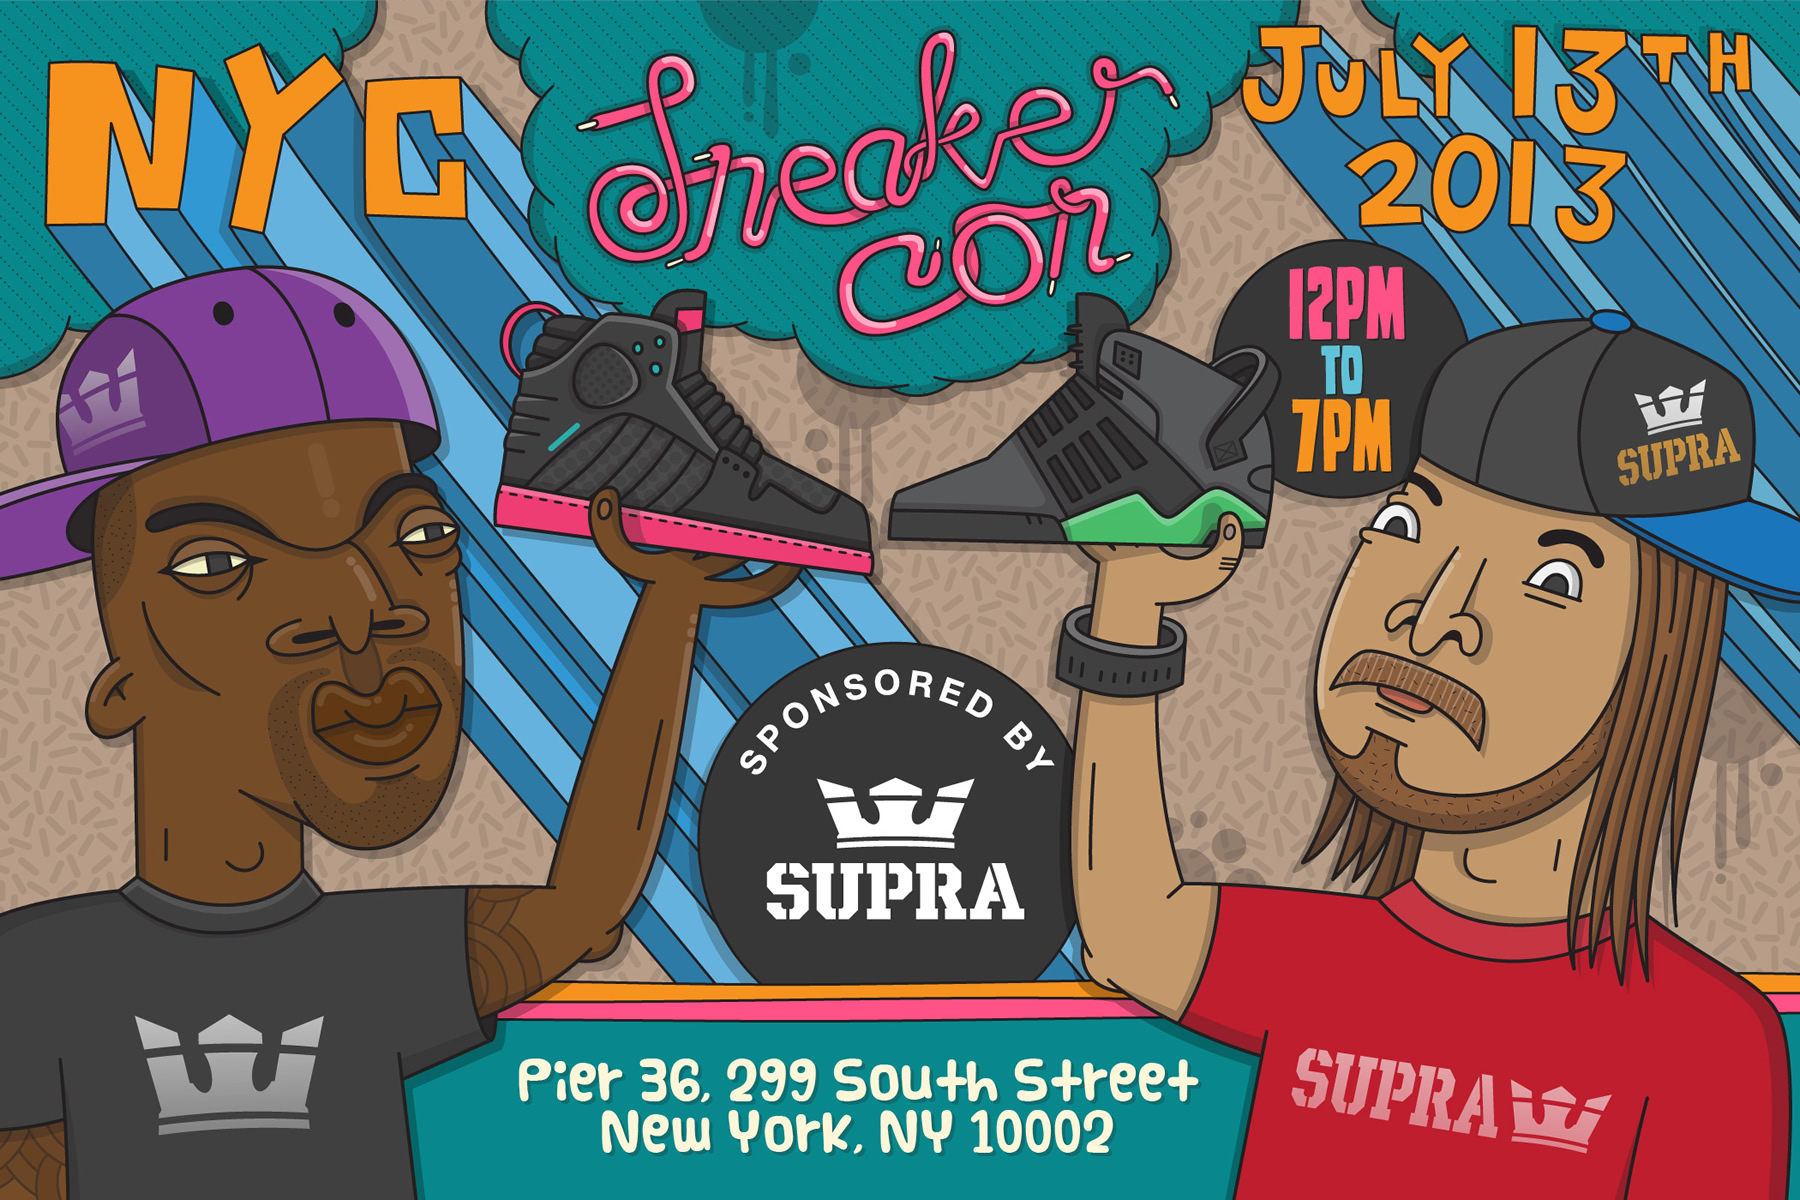 Sneaker Con NYC July 2013 - Event Update